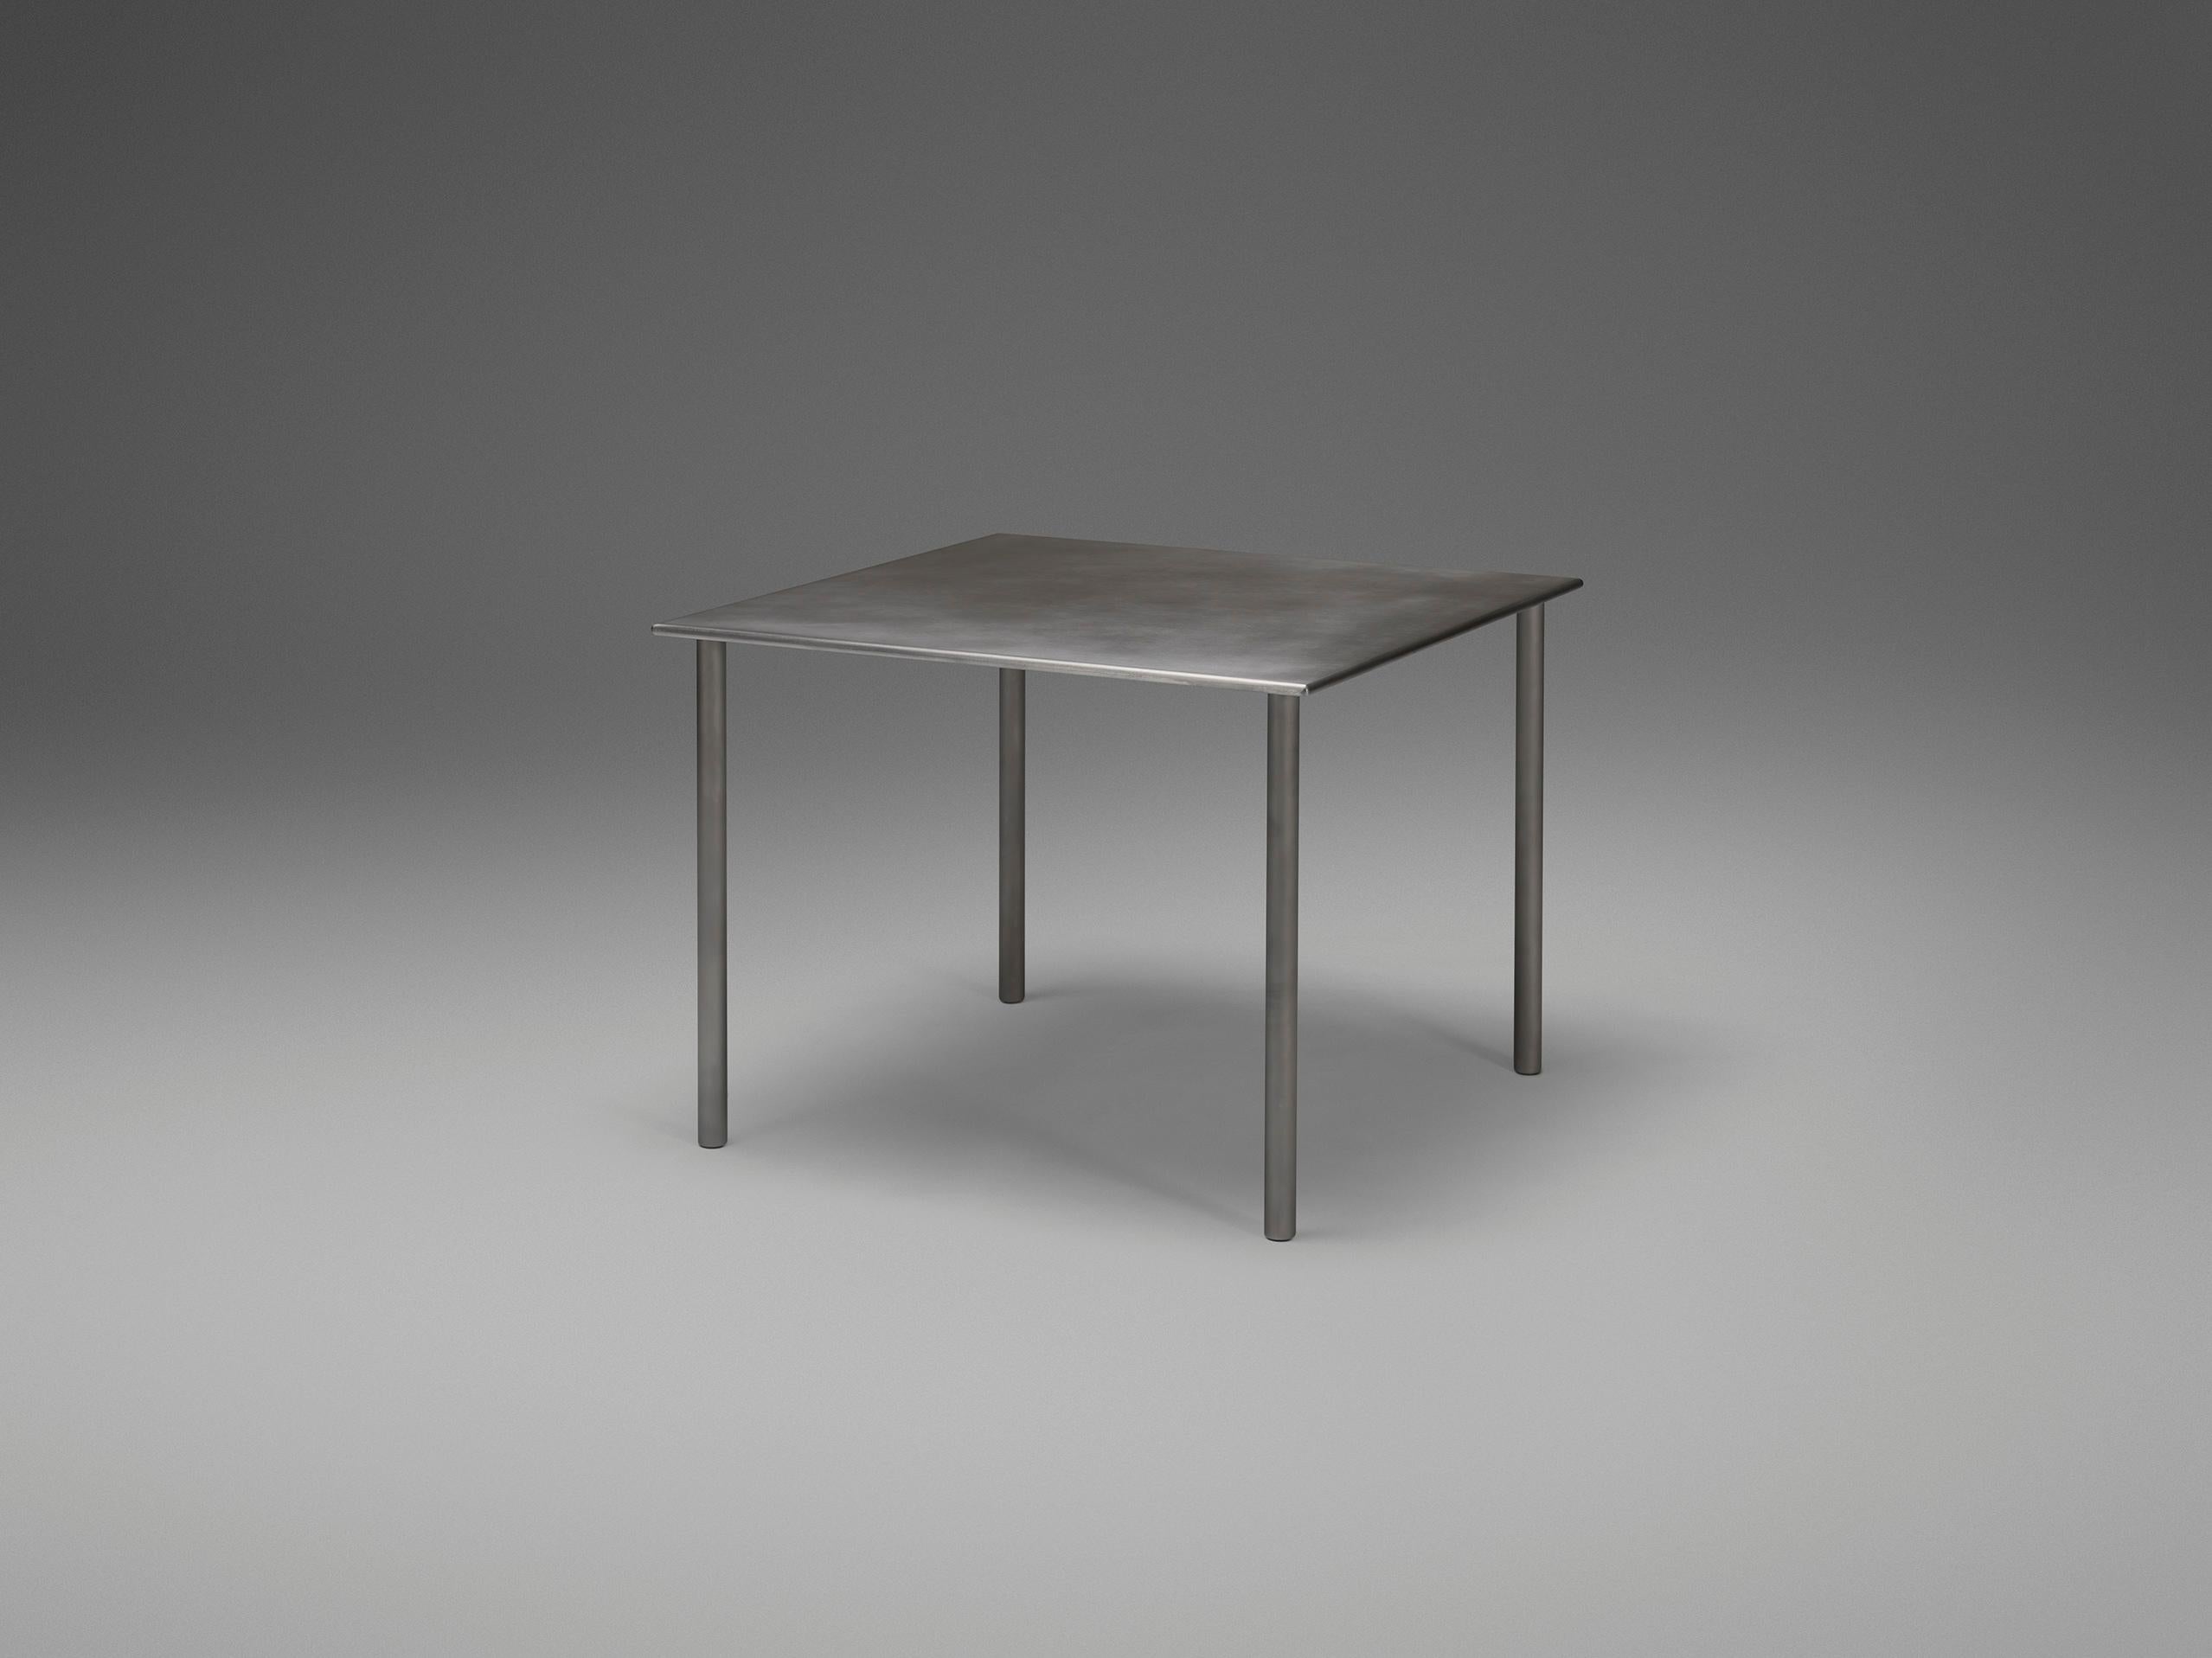 Polished S.C.T. 'Square, Circle, Triangle' Aluminium Table by Jonathan Nesci 'Square' For Sale